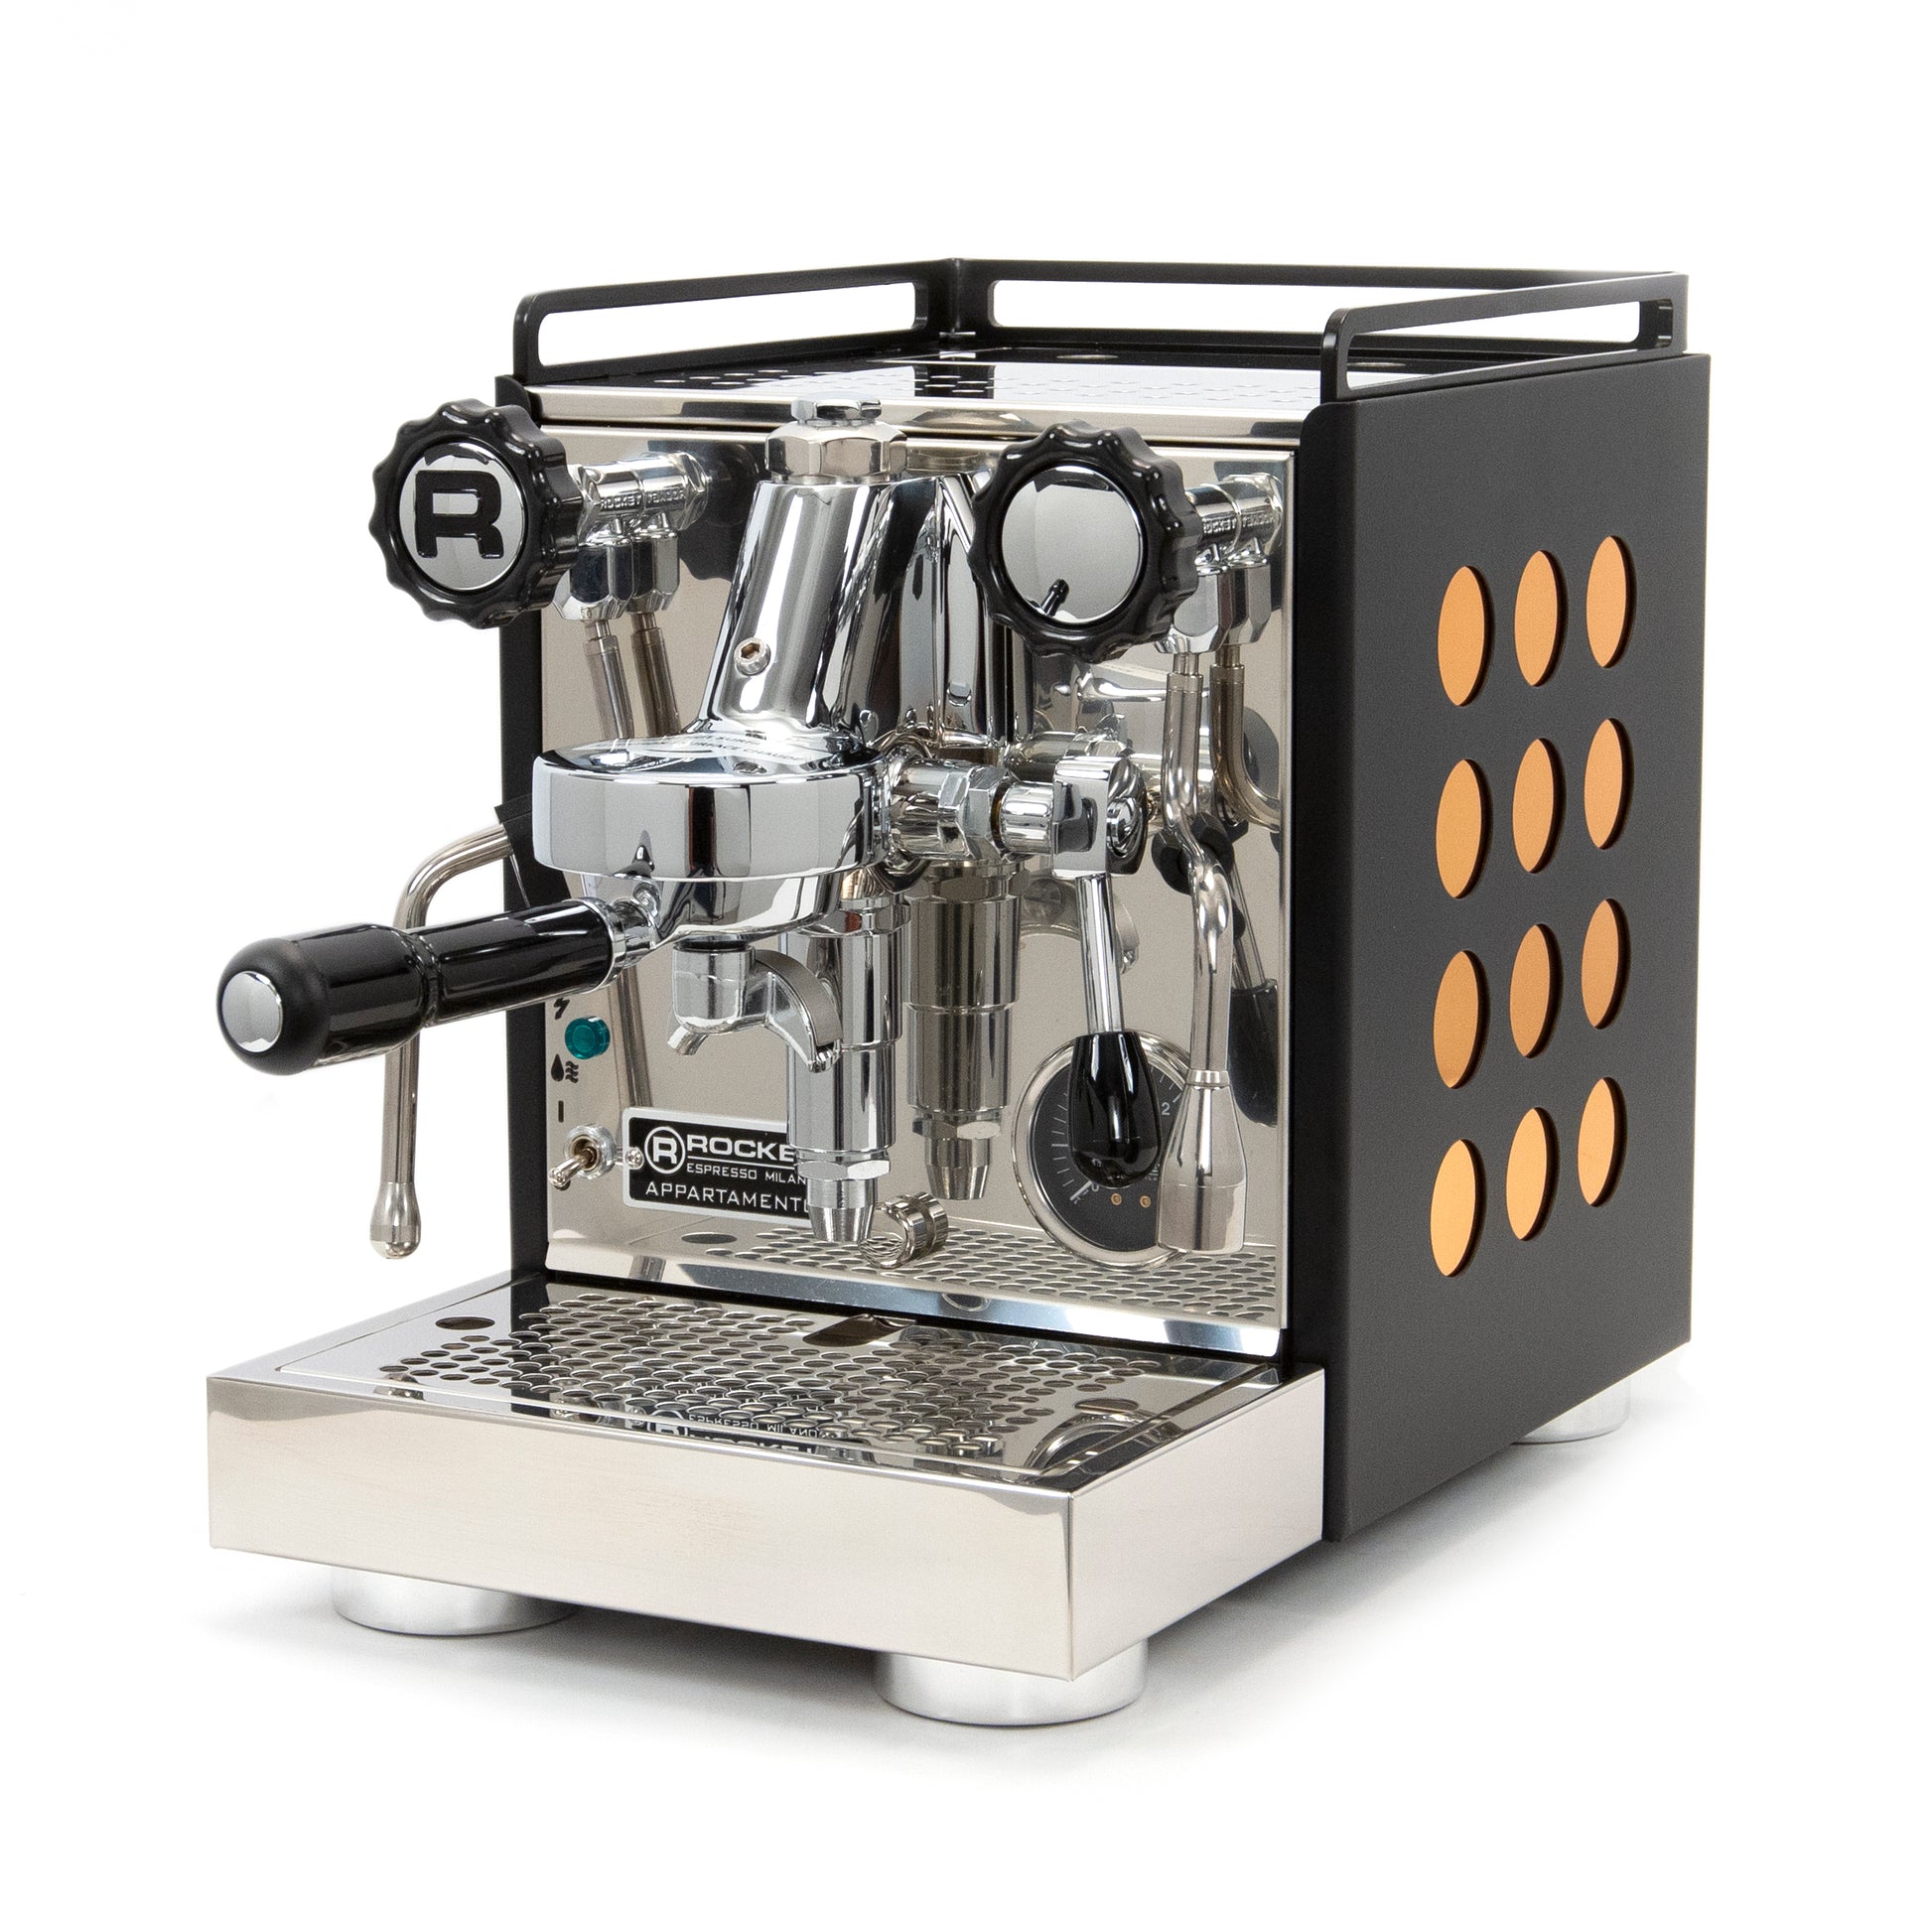 Semi-Automatic Espresso Machine with Grinder and Milk Frother/Steam Wand -  15 Bar Professional All-in-One Coffee Maker with Italian Pump, 2.5L Water  Tank, Stainless Steel